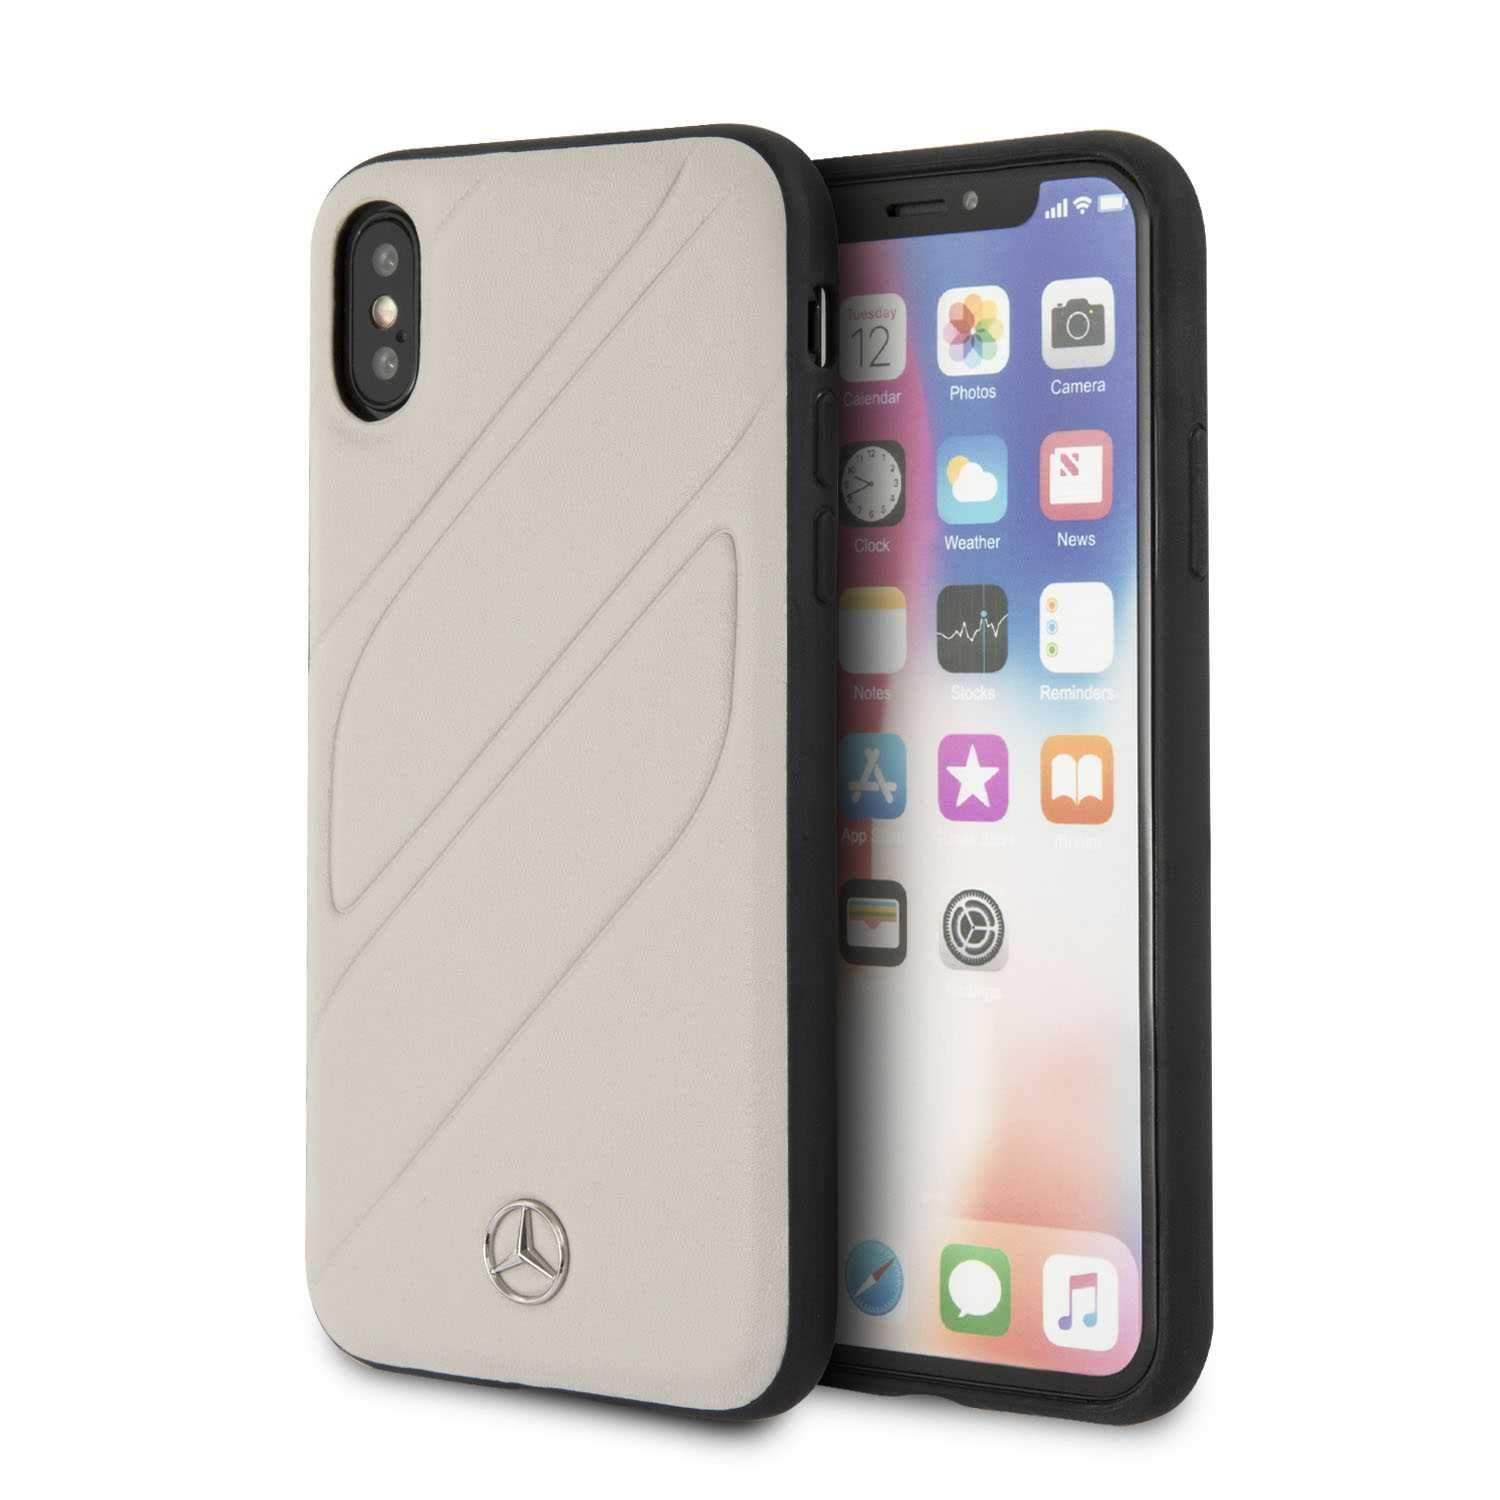 Mercedes-Benz mercedes benz new organic i genuine leather hard case for iphone x gray